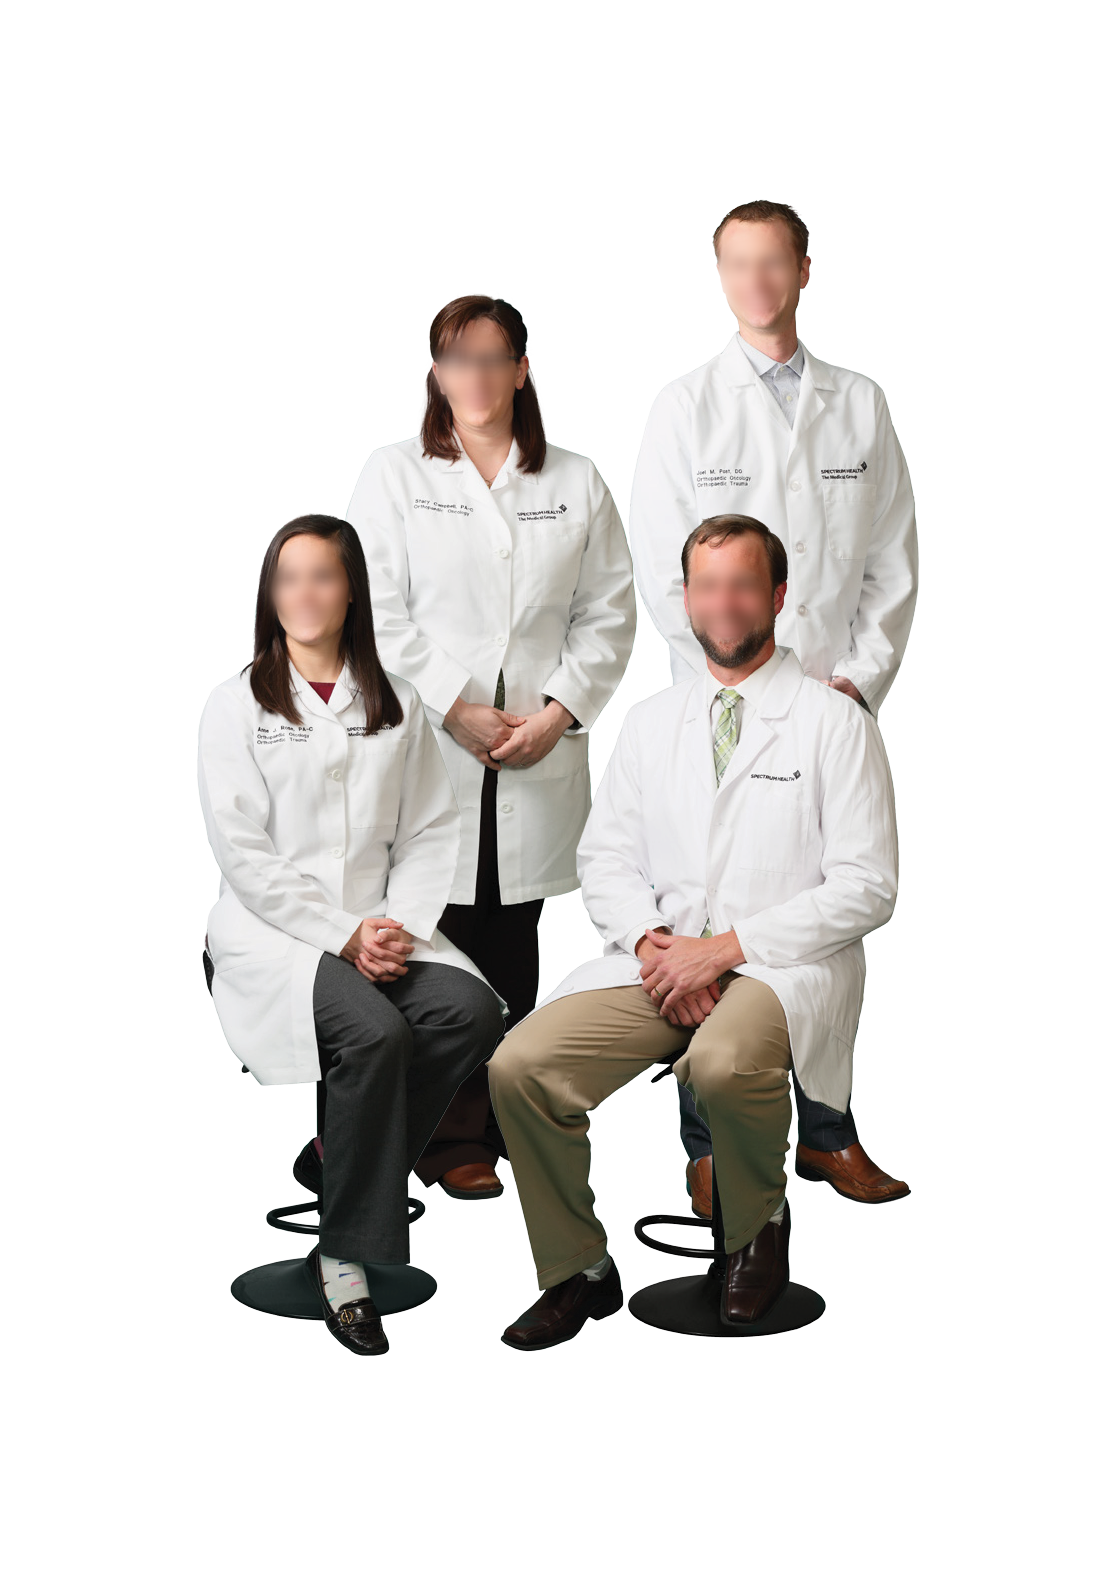 17.52.9.F - Group Images of Orthopedics Teams - Without Names-6.png